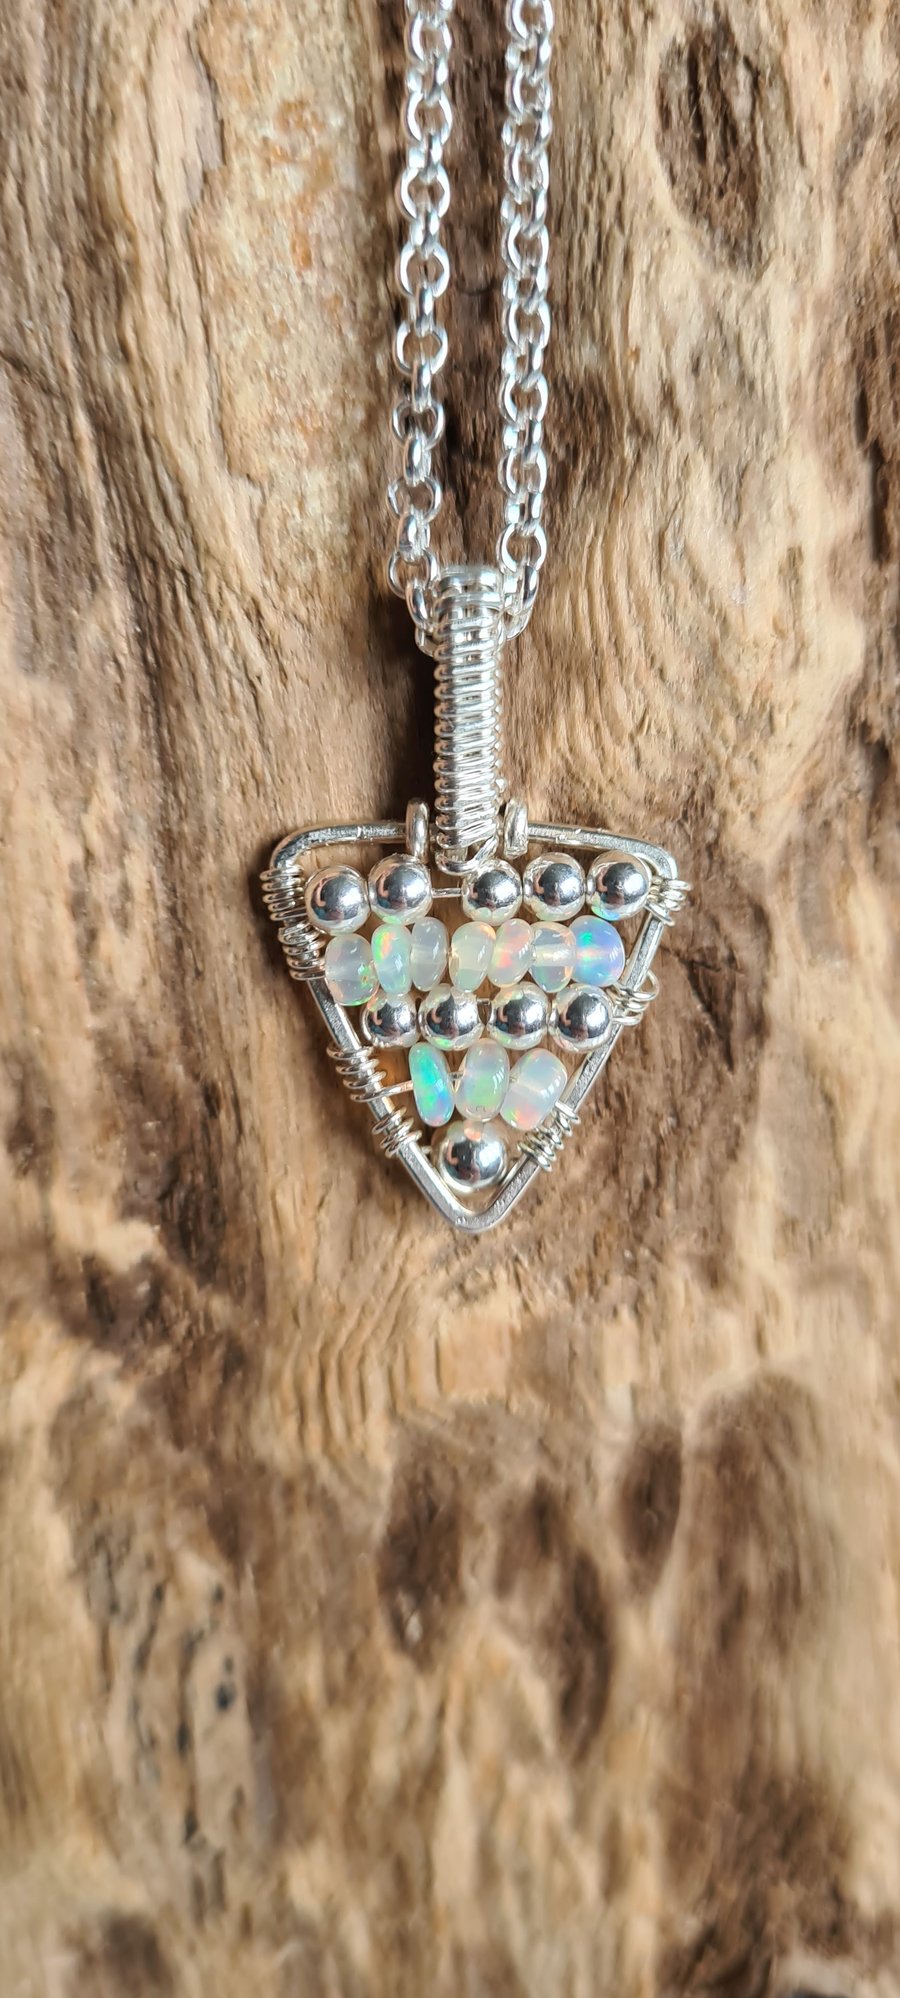 Handmade 925 Silver & Natural Ethiopian Opal Pendant Necklace with Silver Chain